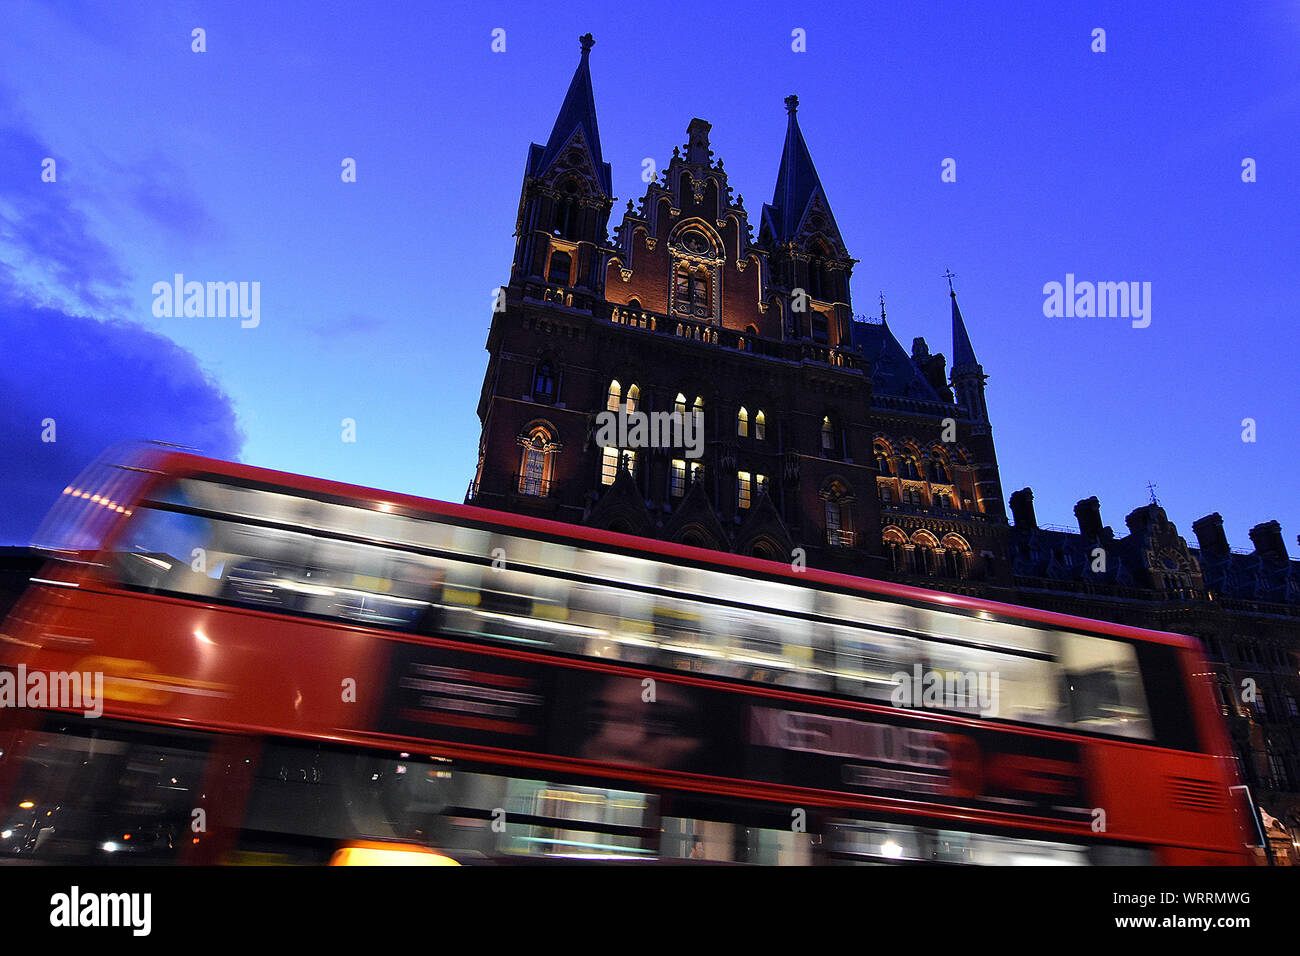 Blurred Motion Of Double-decker Bus By Church At Dusk Stock Photo